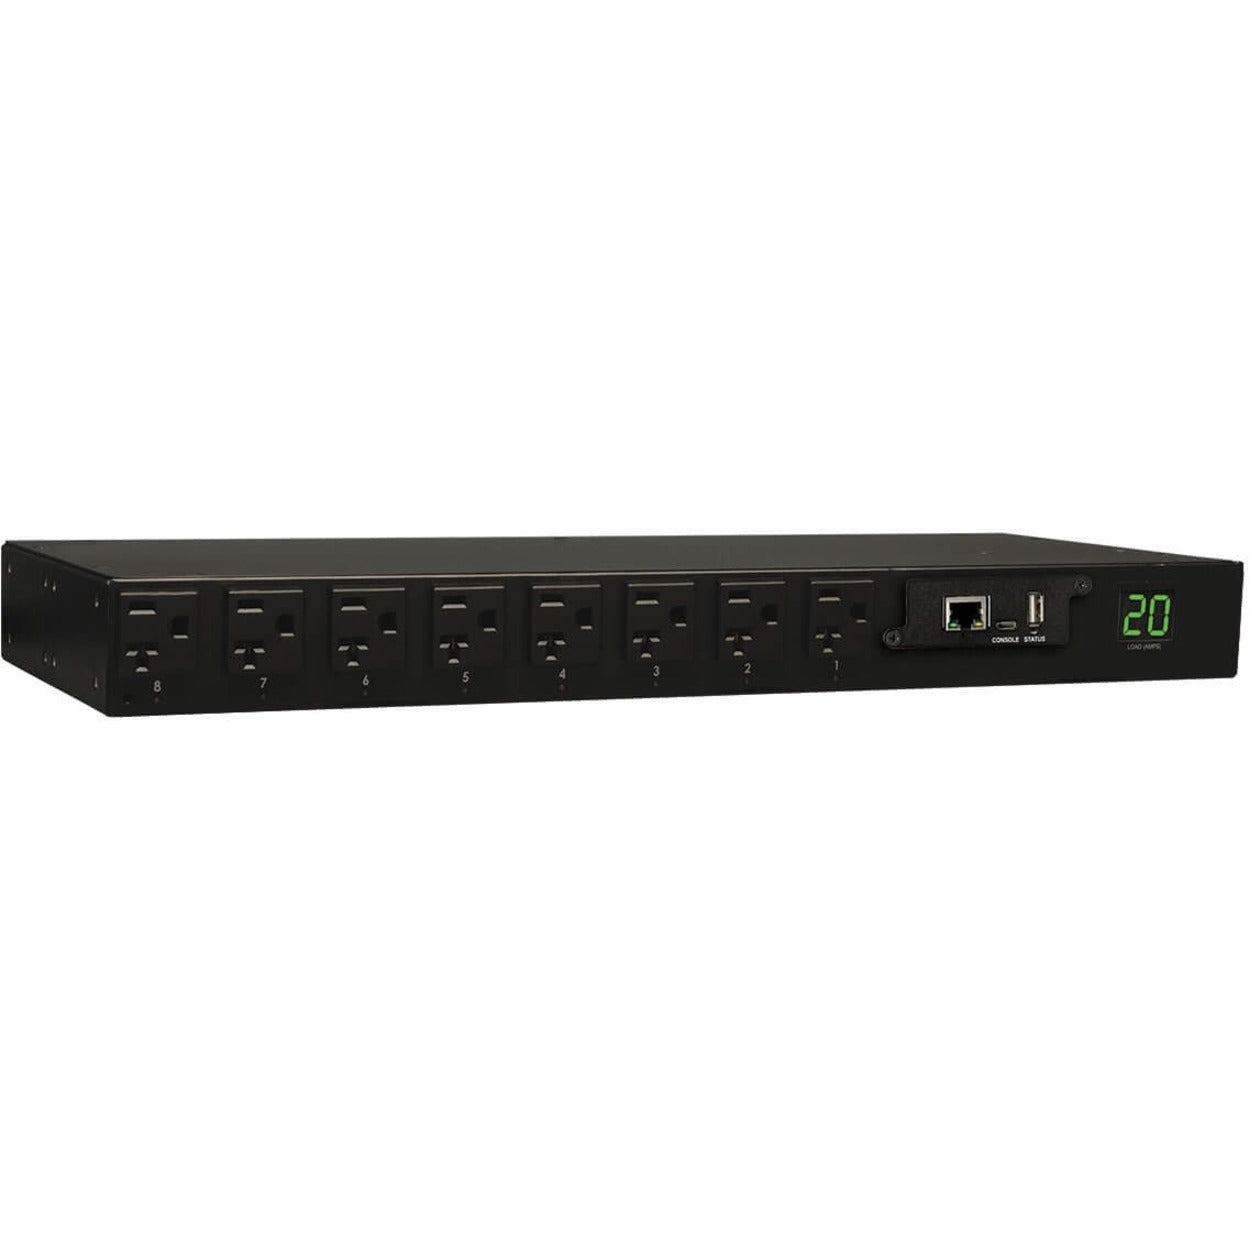 Tripp Lite PDUMH20NET Switched Metered PDU, 16-Outlets, 120V AC, Rack-mountable